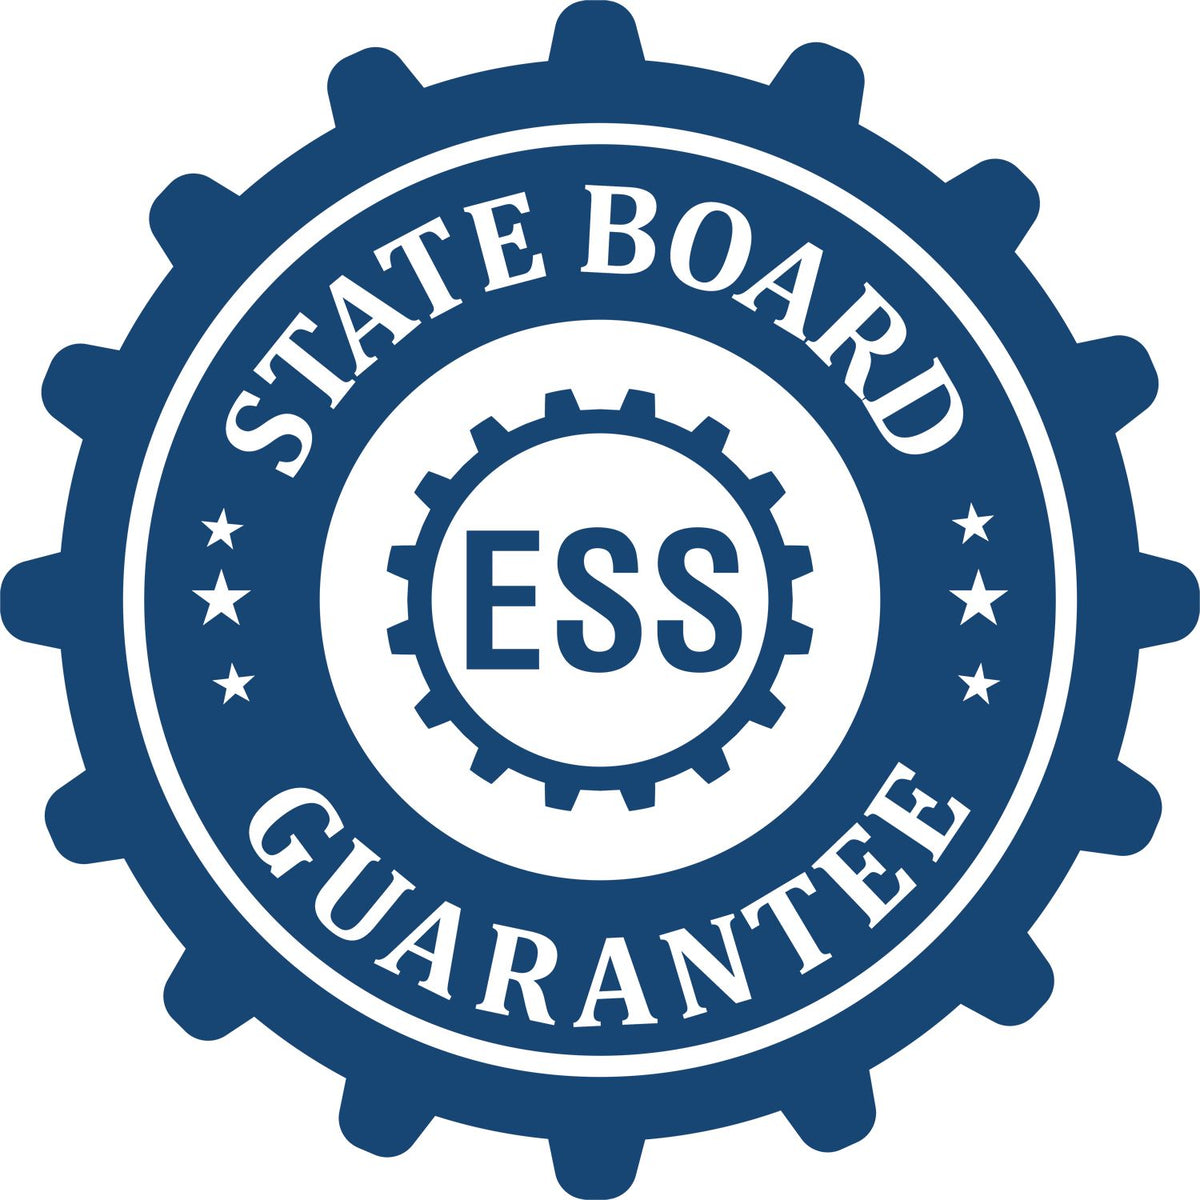 An emblem in a gear shape illustrating a state board guarantee for the State of Idaho Extended Long Reach Engineer Seal product.